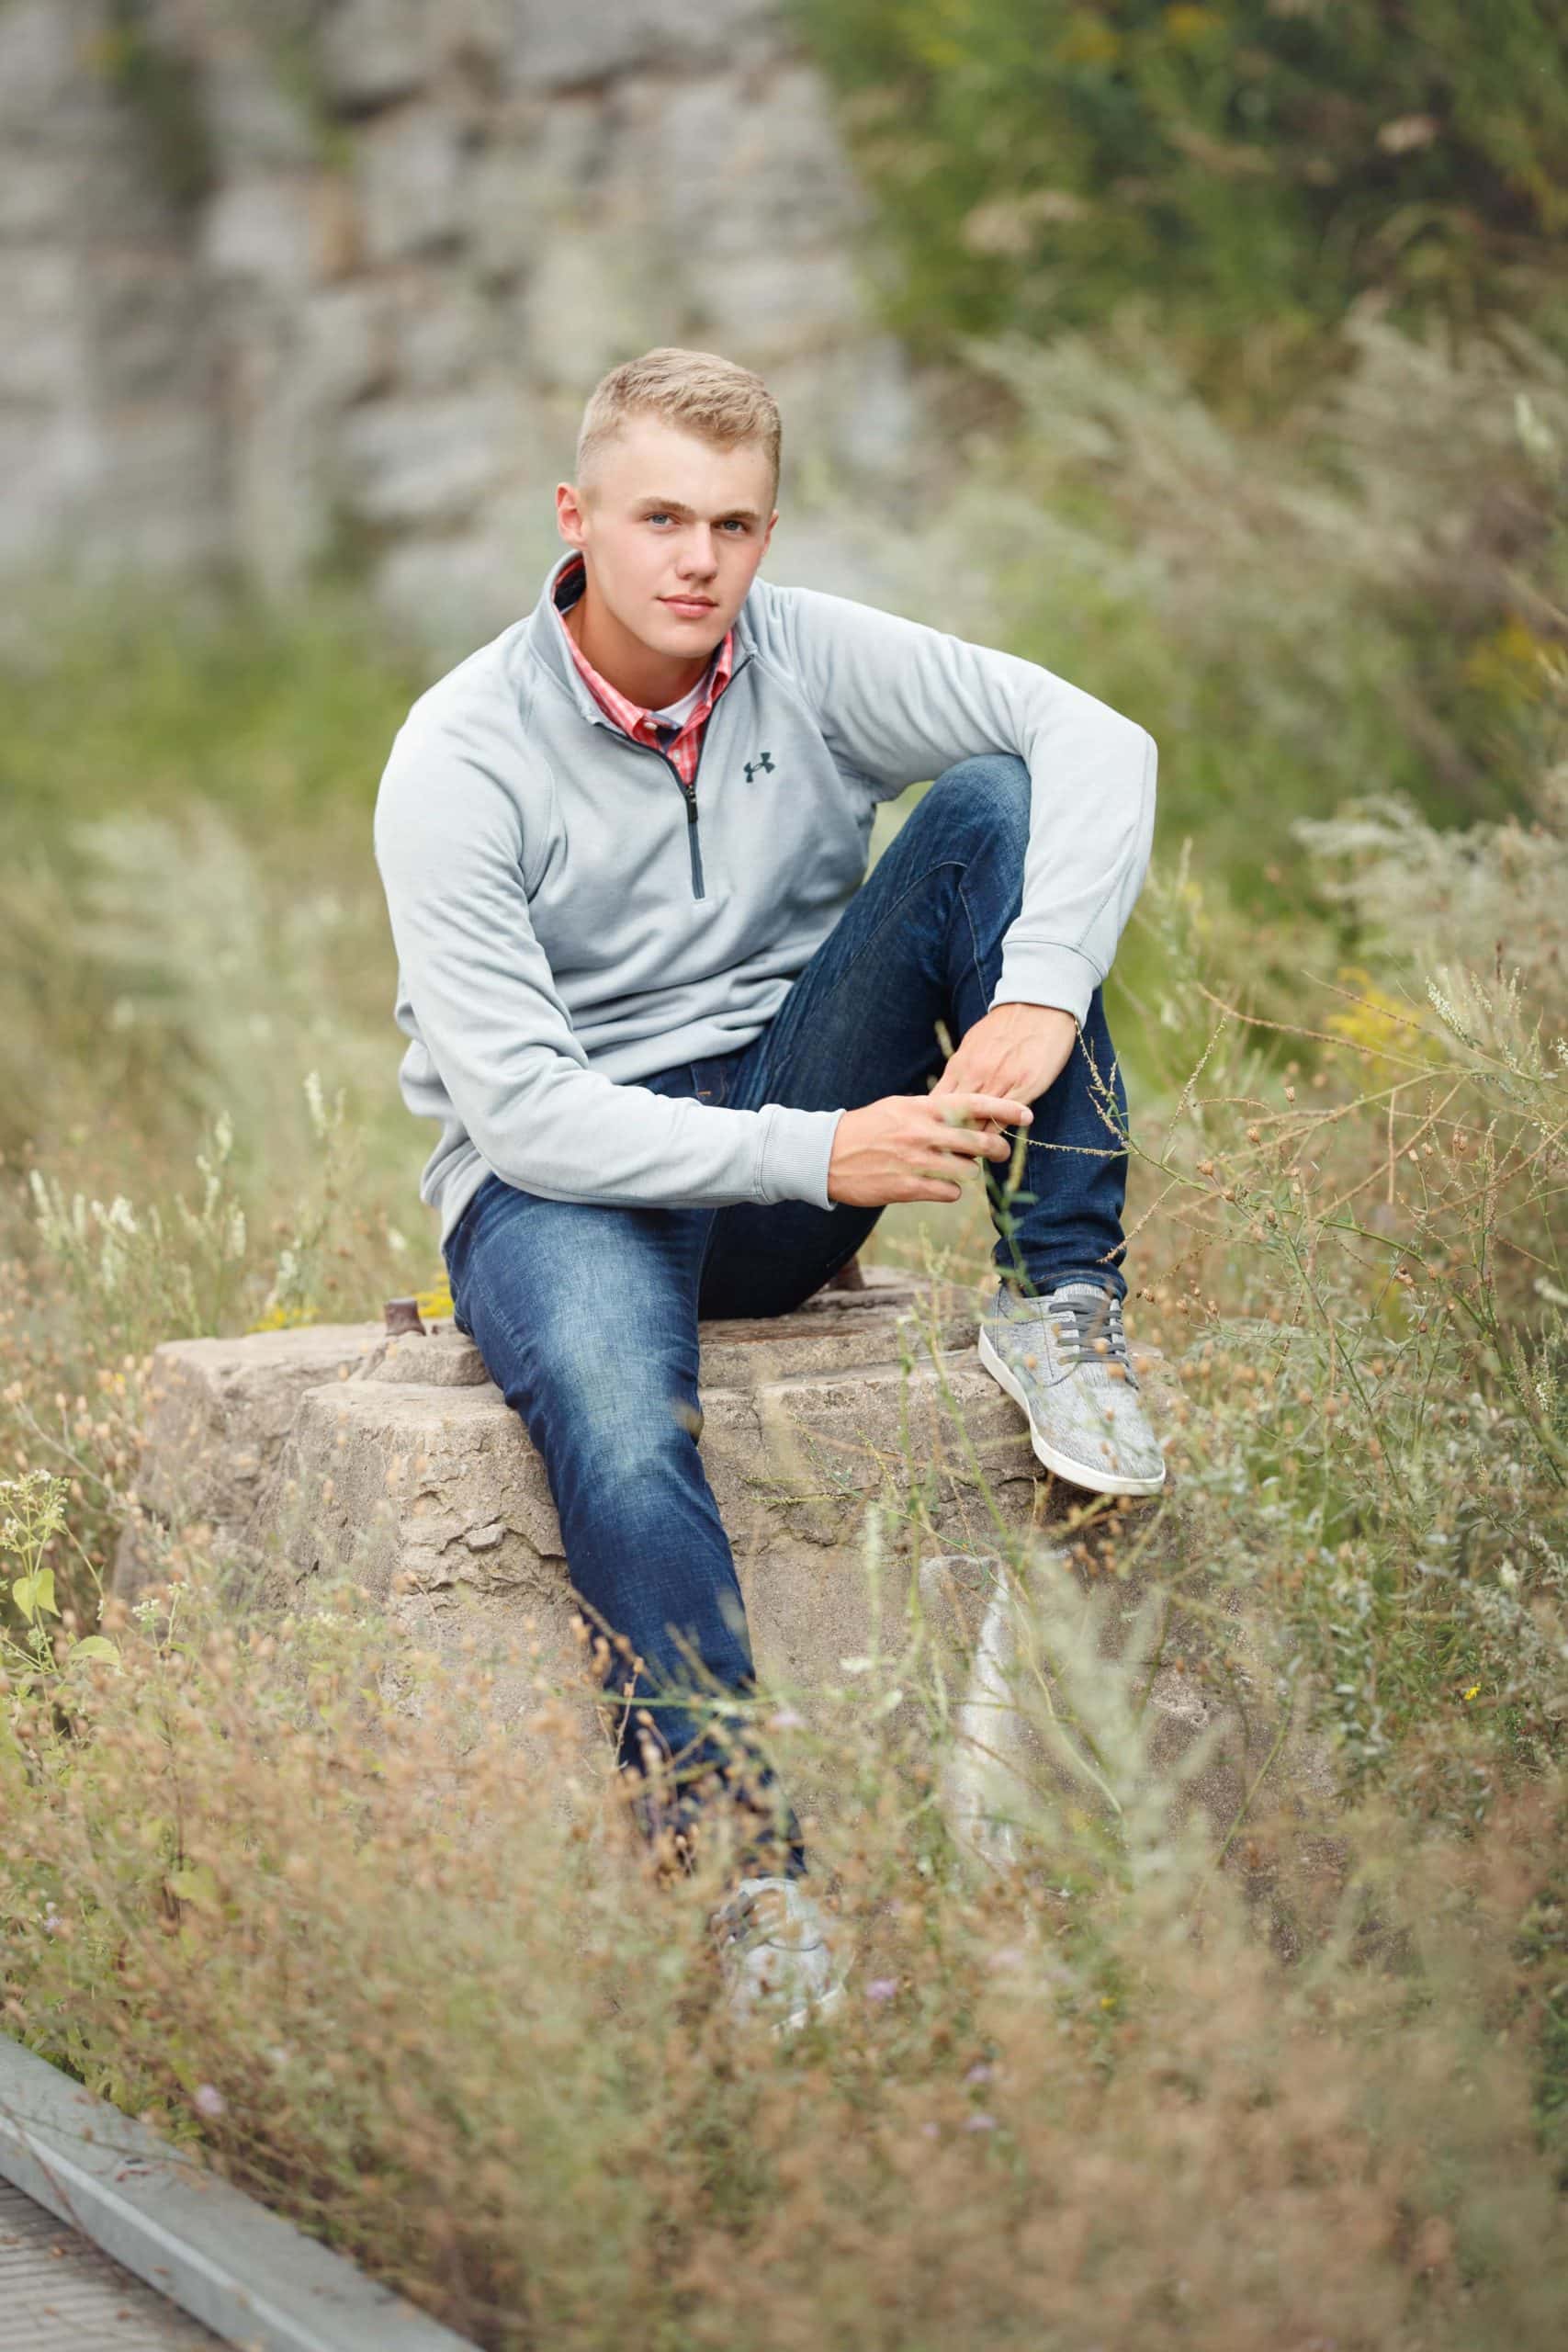 How should men pose for senior pictures?